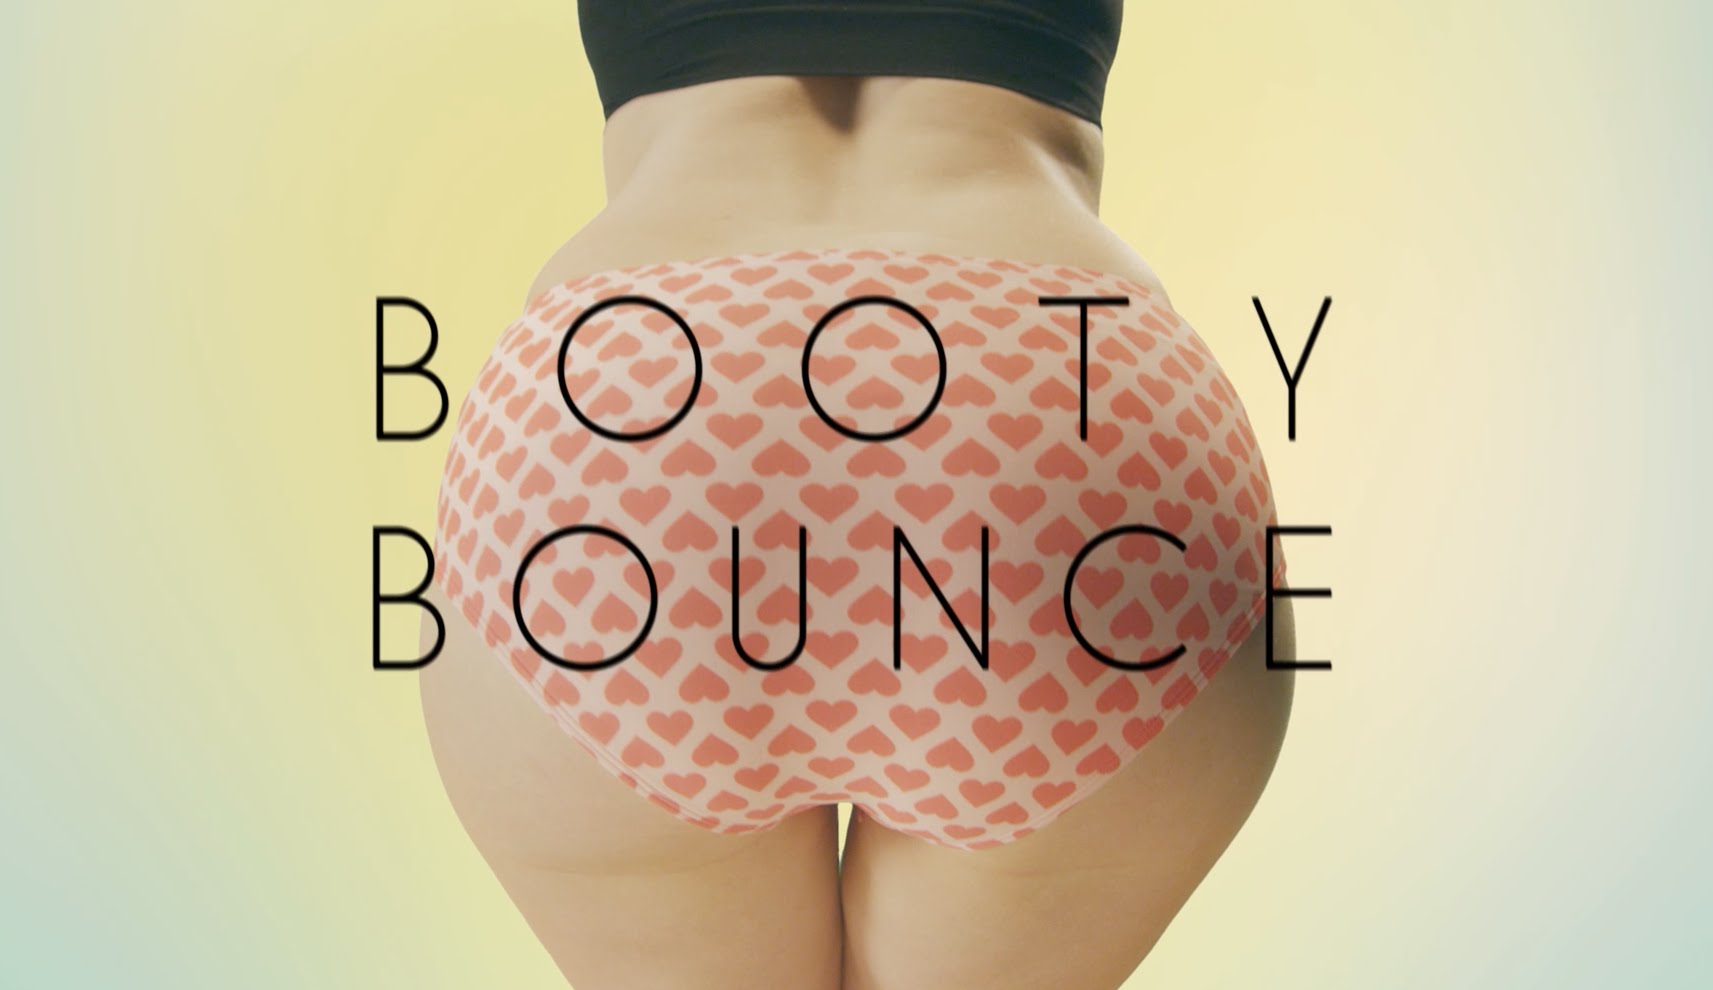 Come here want bounce your free porn compilation